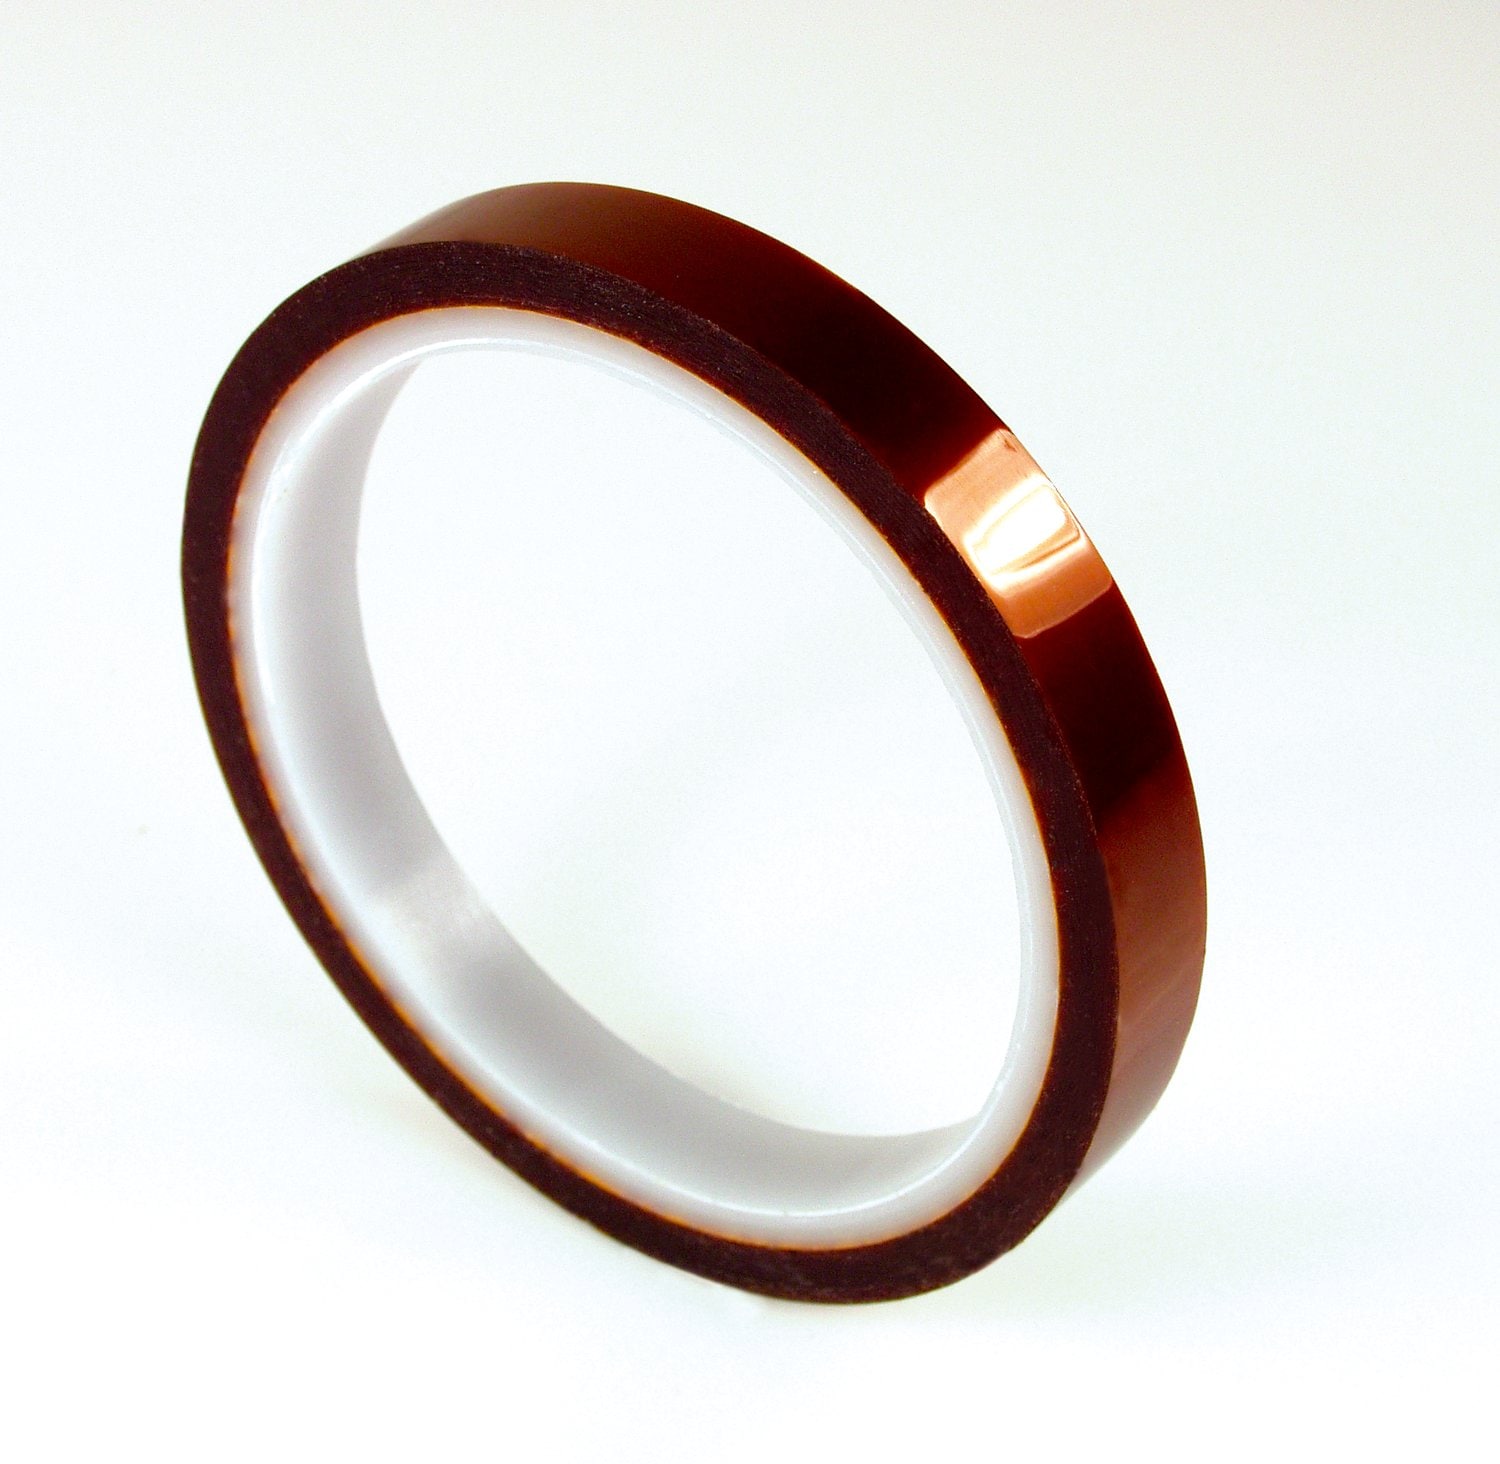 7000148822 - 3M Polyimide Film Electrical Tape 92, Amber, Silicone Adhesive, 1 mil
film, 1/4 in x 36 yd (6,35 mm x 33 m), 36/Case